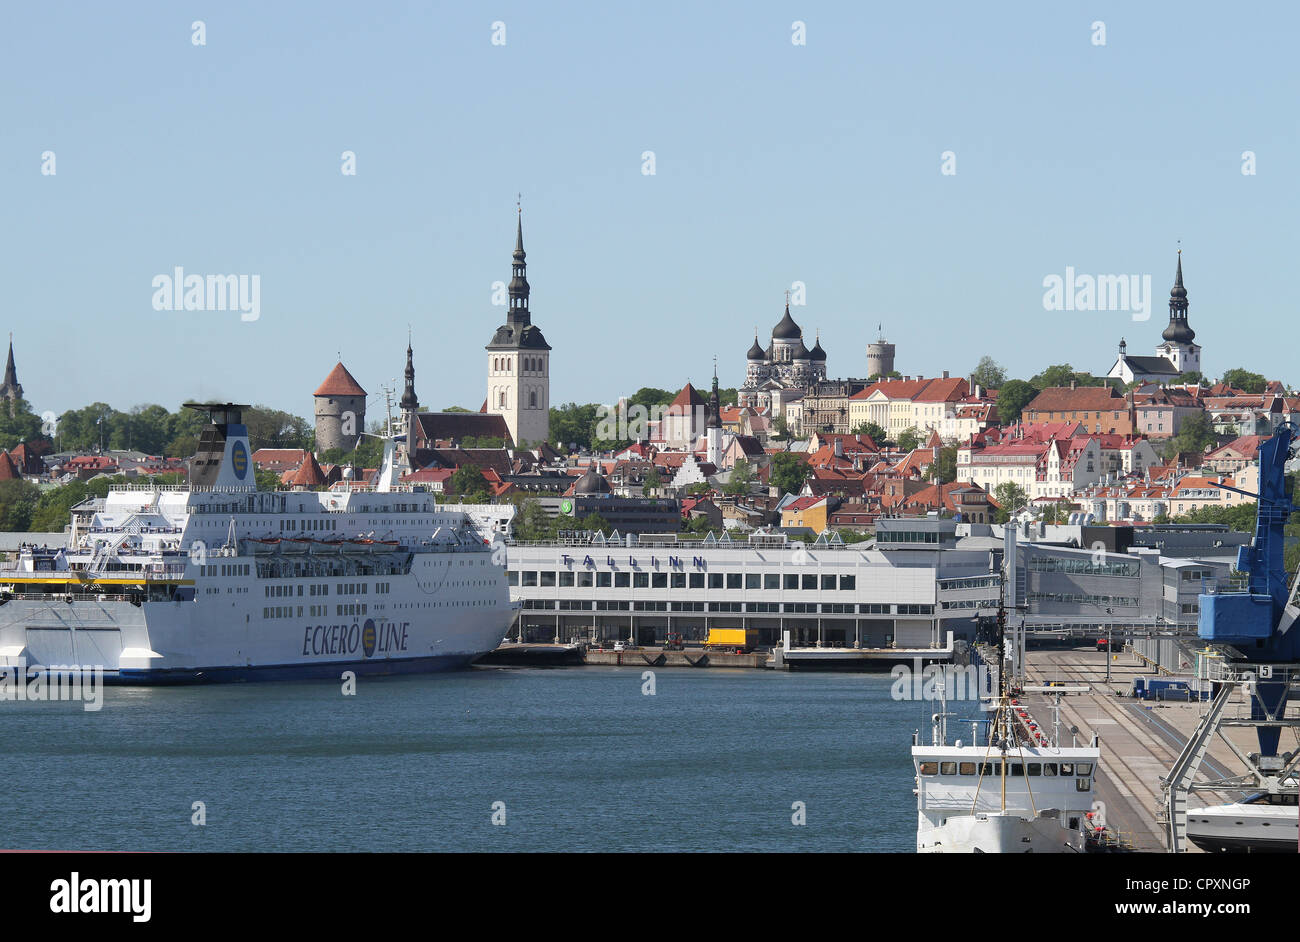 A view of the city of Tallinn Estonia from the Baltic Sea Stock Photo